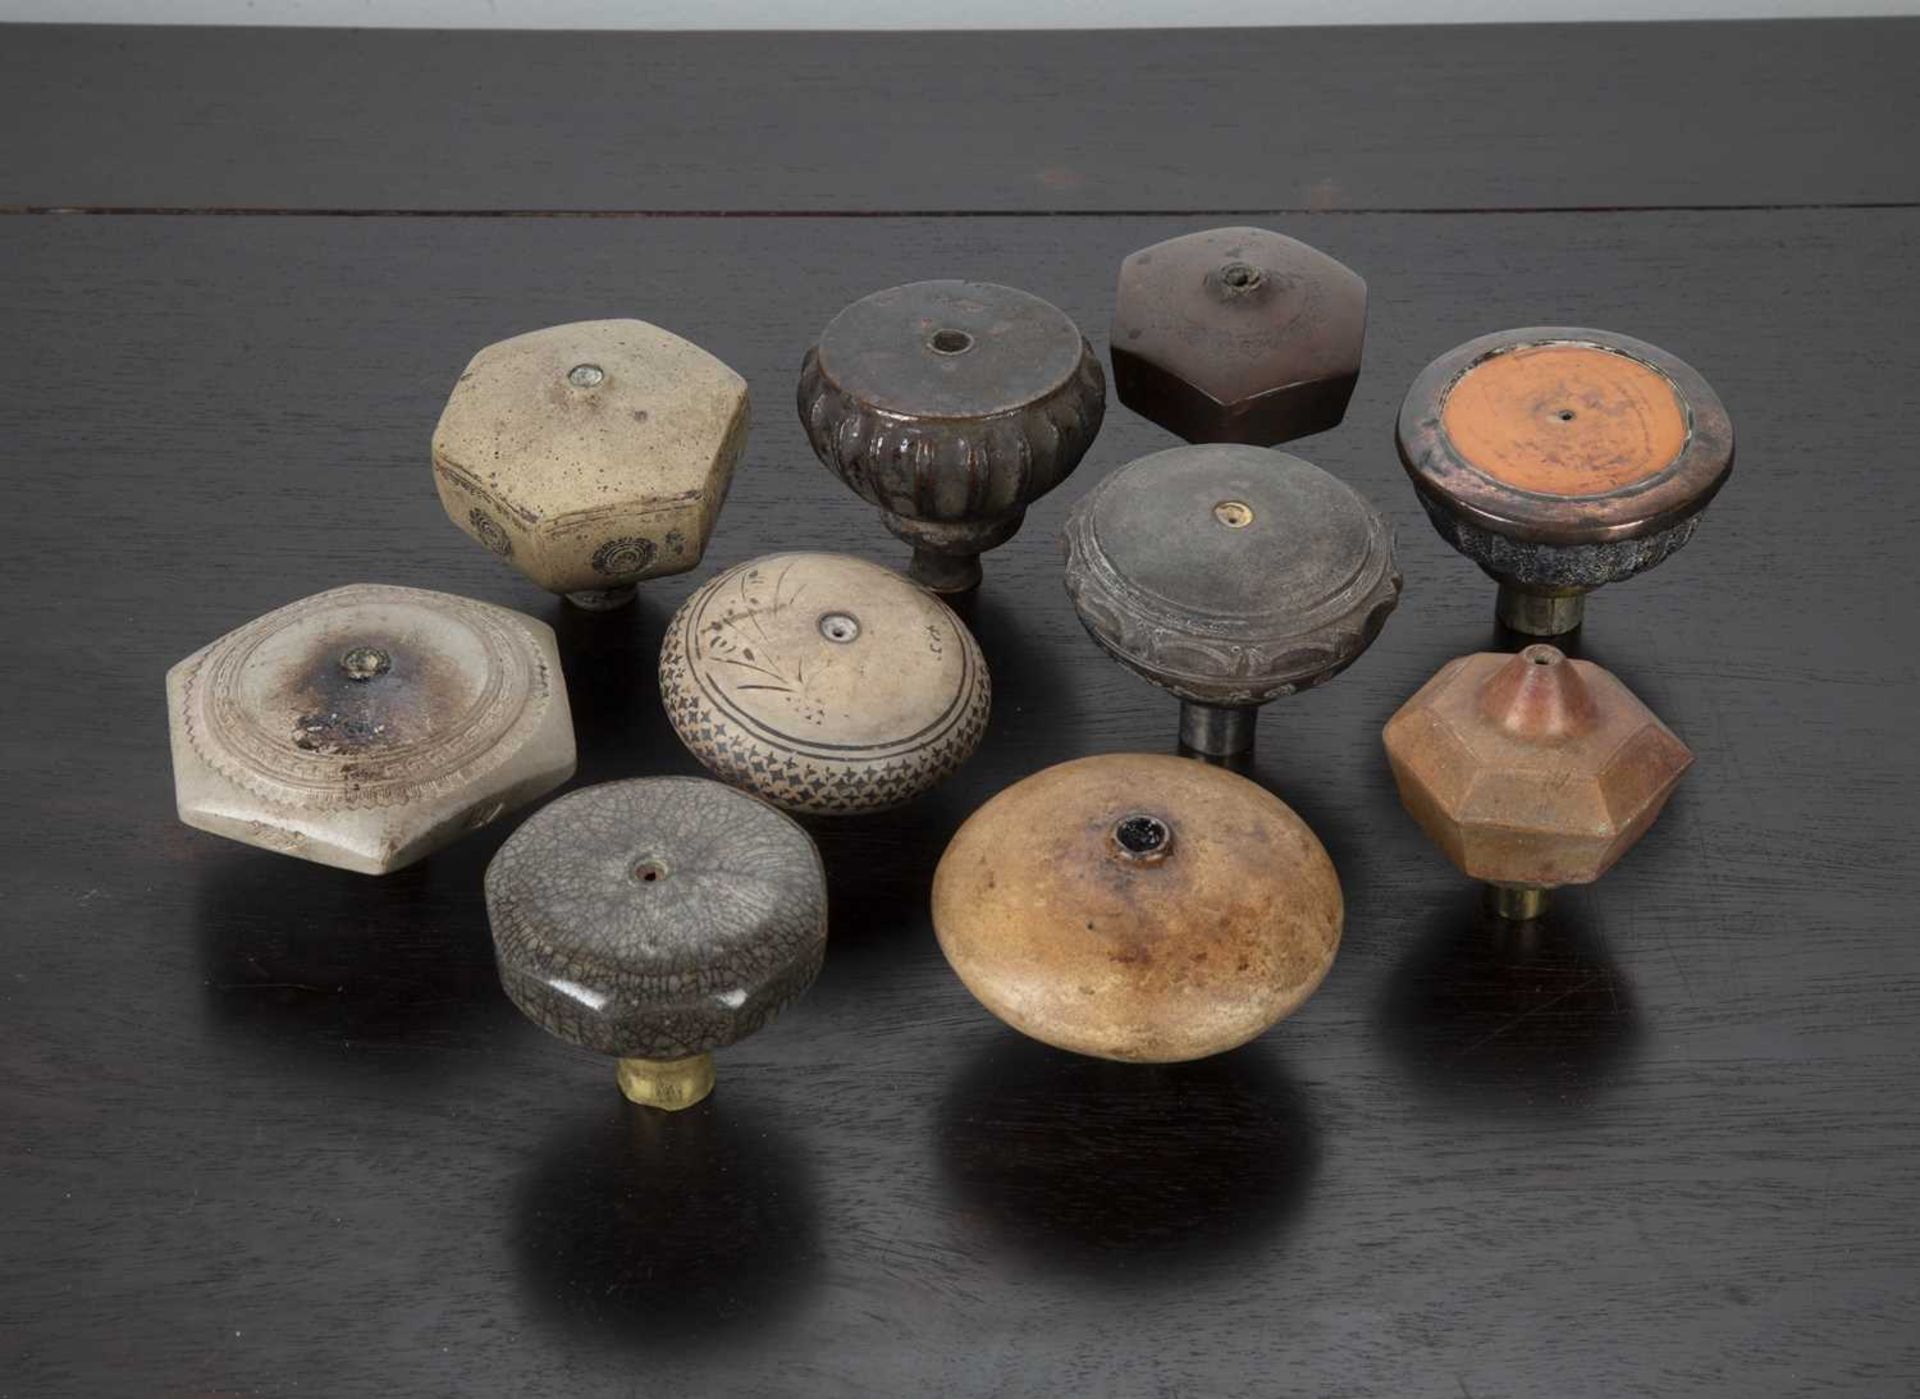 Ten opium pipe bowls Chinese, circa 1900 including engraved, earthenware and other examples (10)At